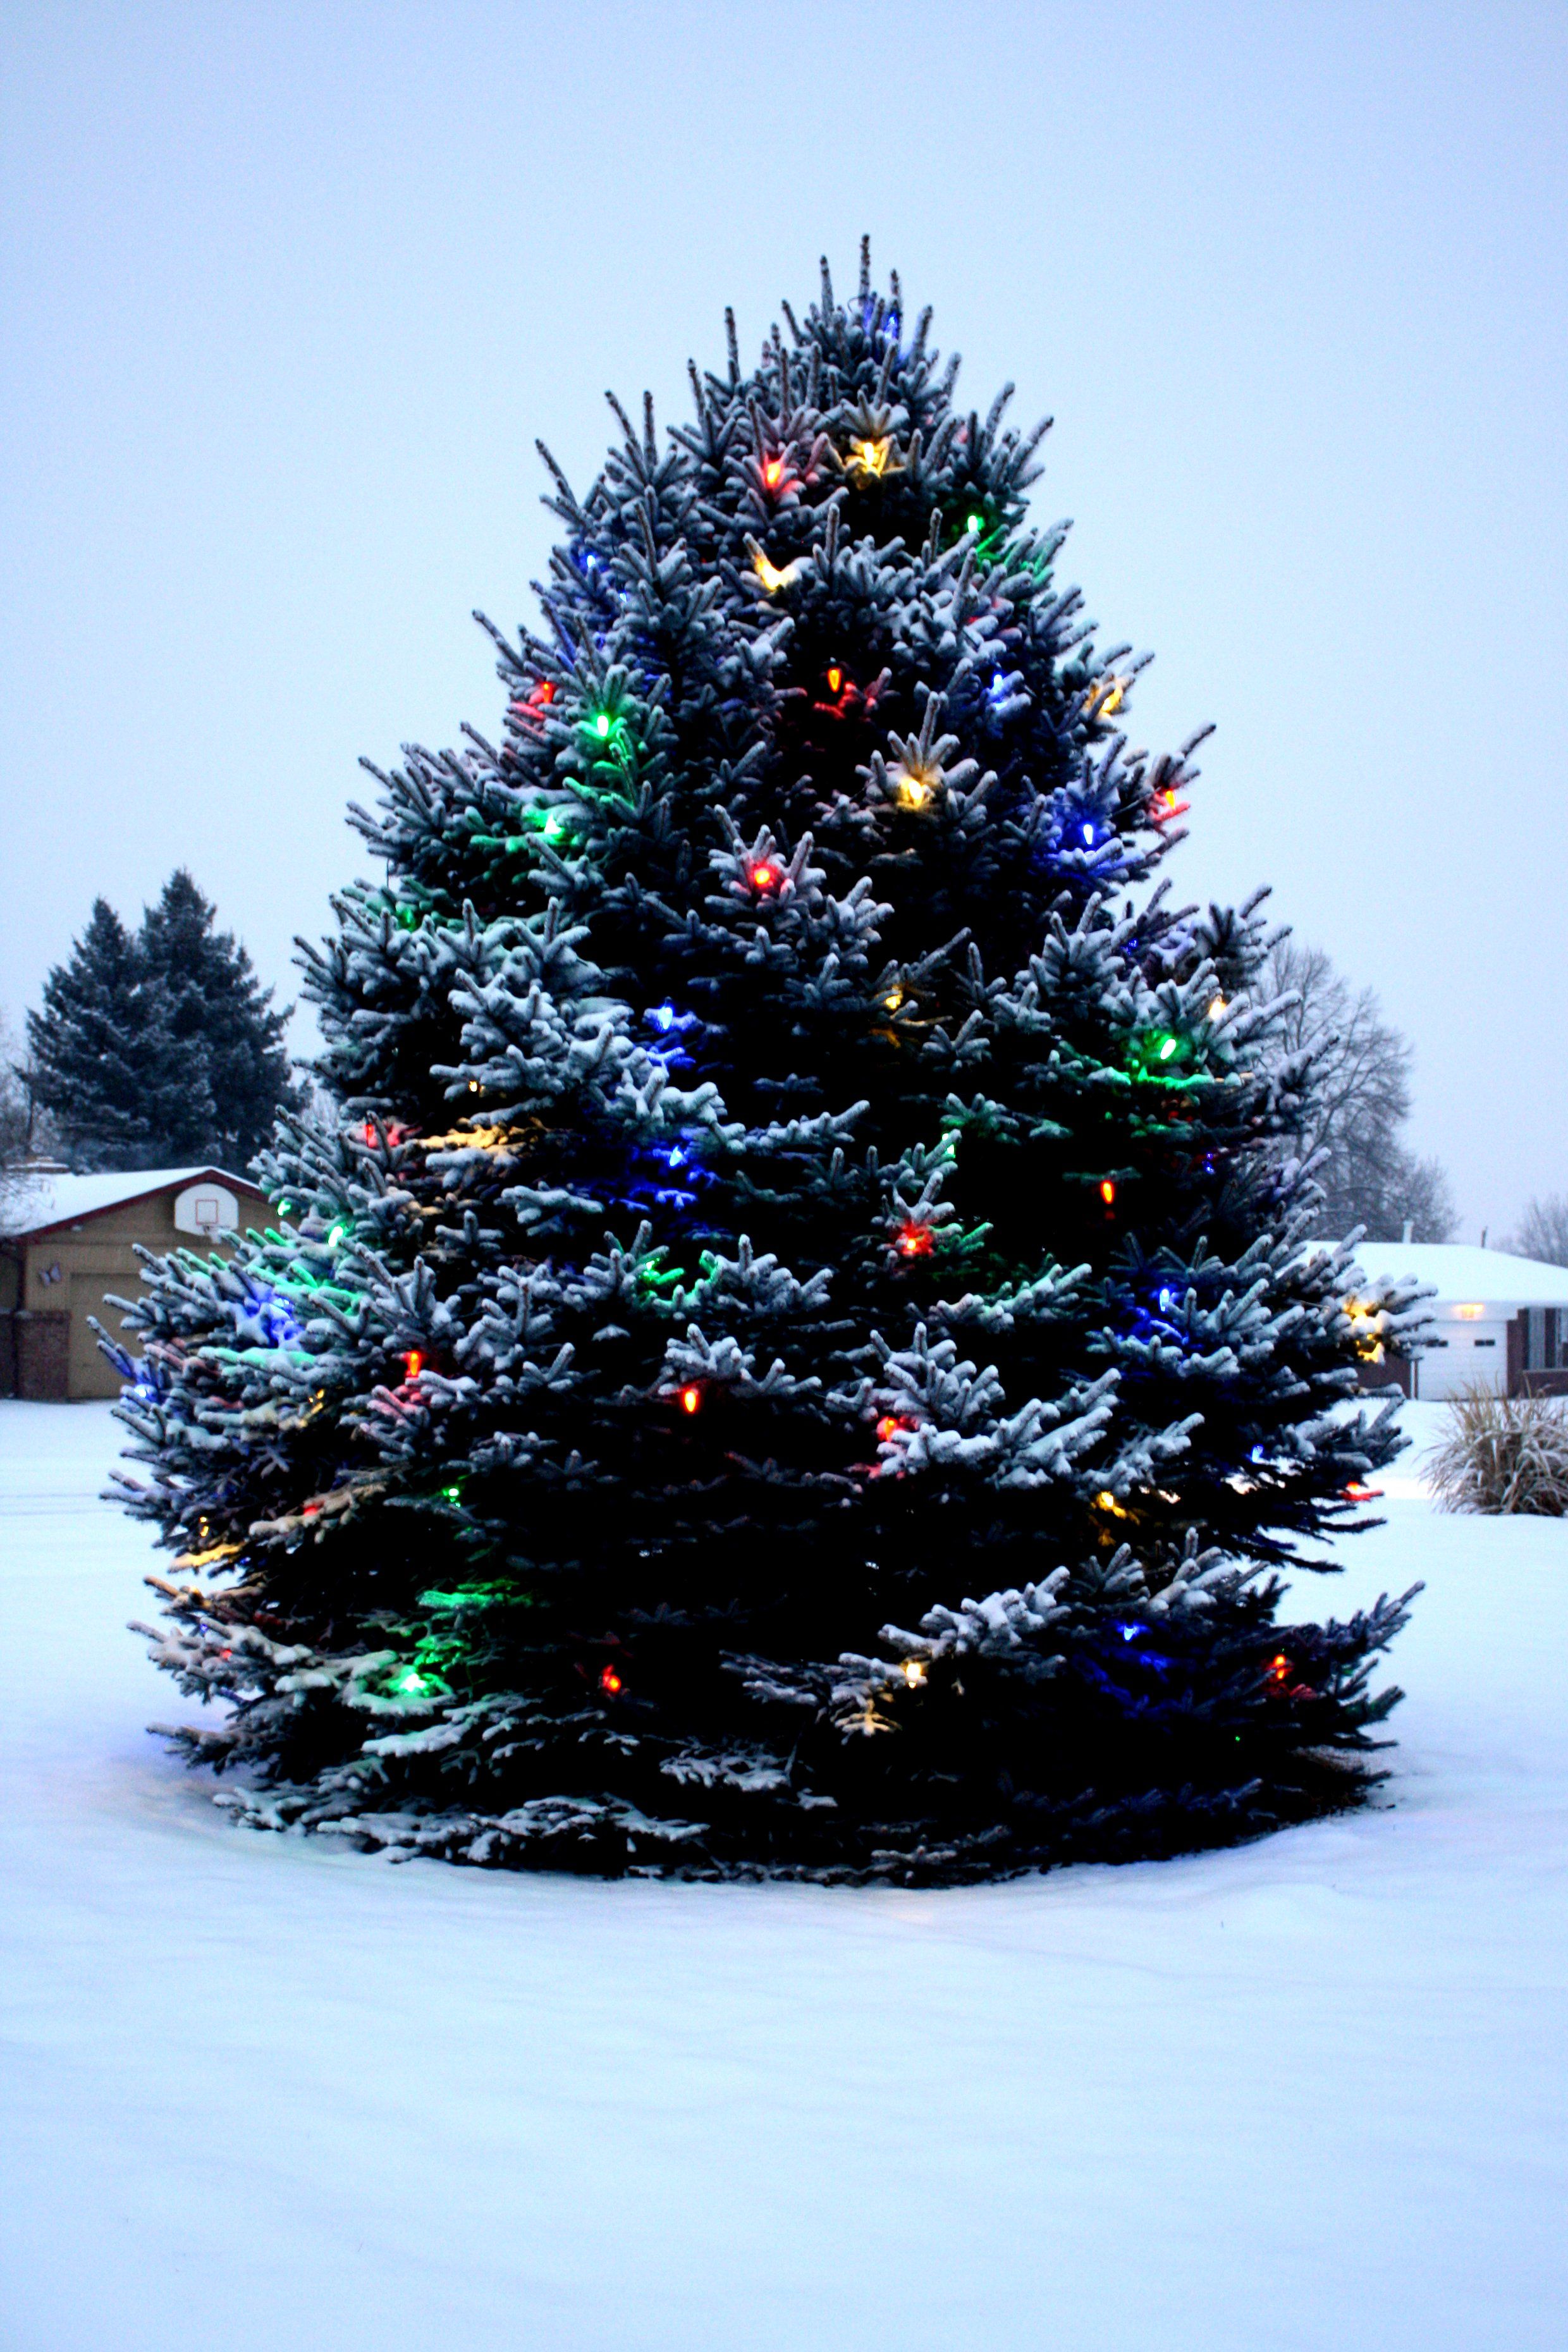 Outdoor Christmas Tree with Lights and Snow Picture. Free Photograph. Photo Public Domain